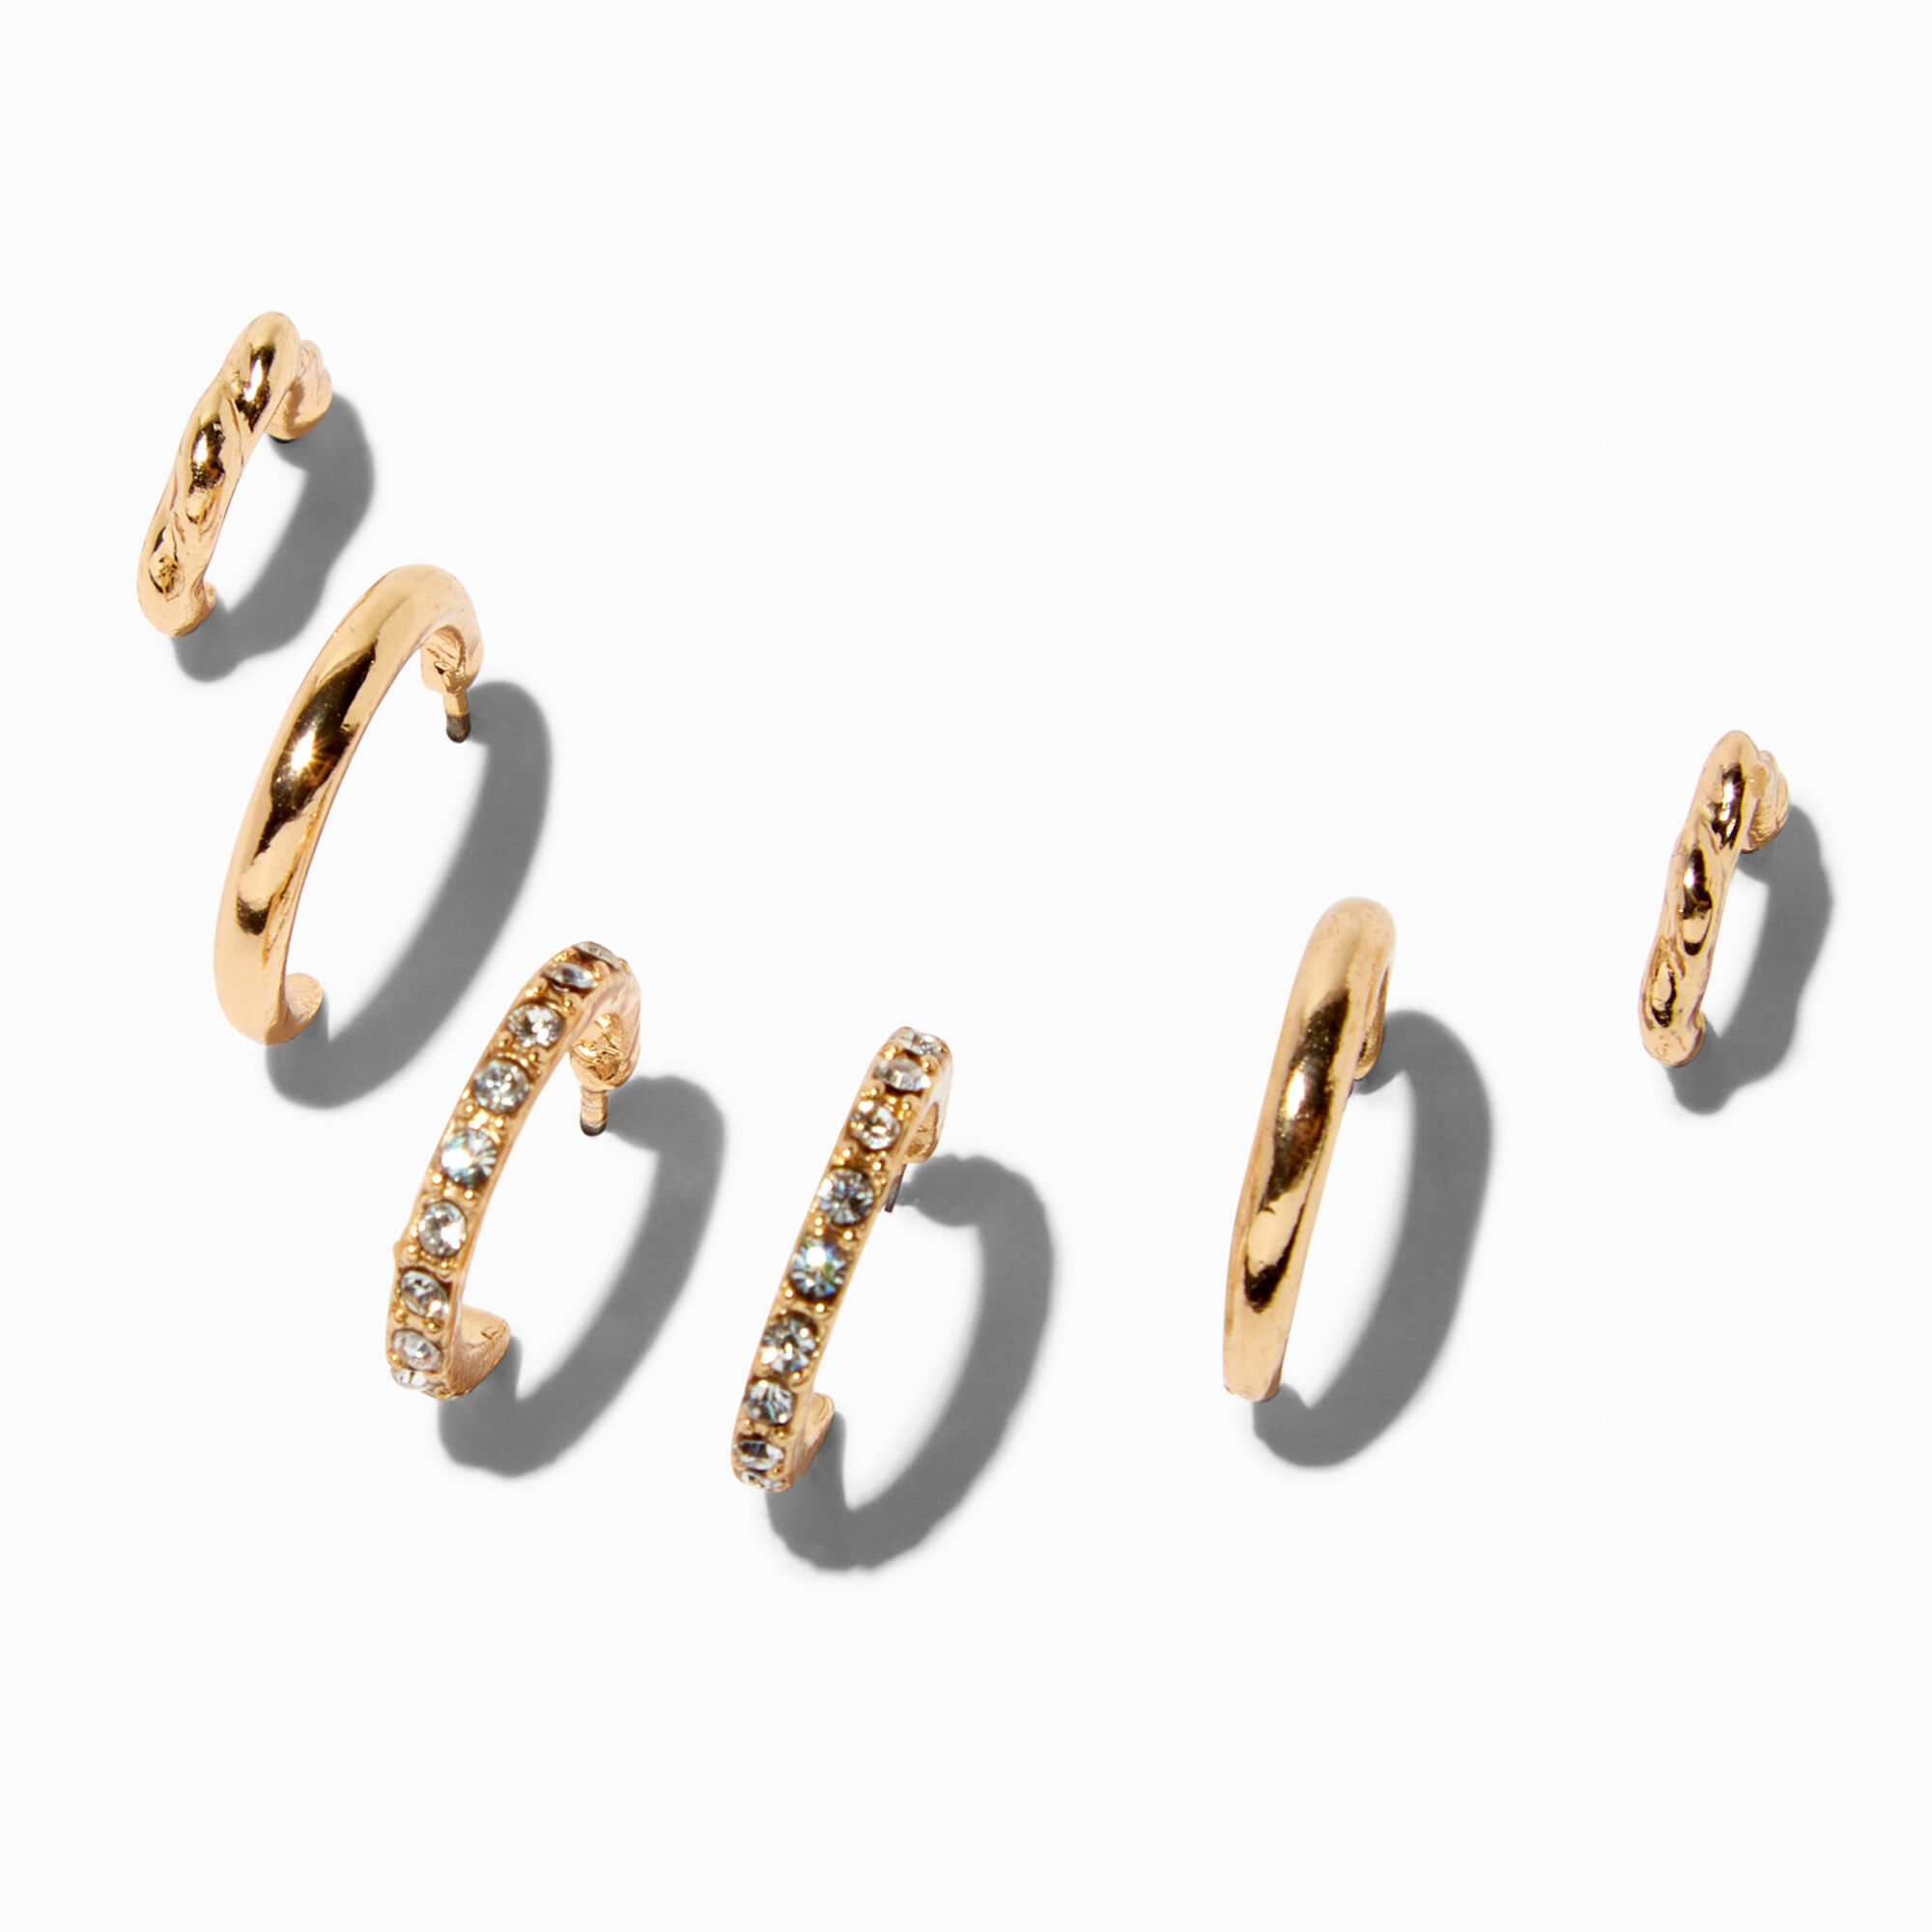 View Claires Tone Graduated Embellished Huggie Hoop Earring Stackables Set 3 Pack Gold information